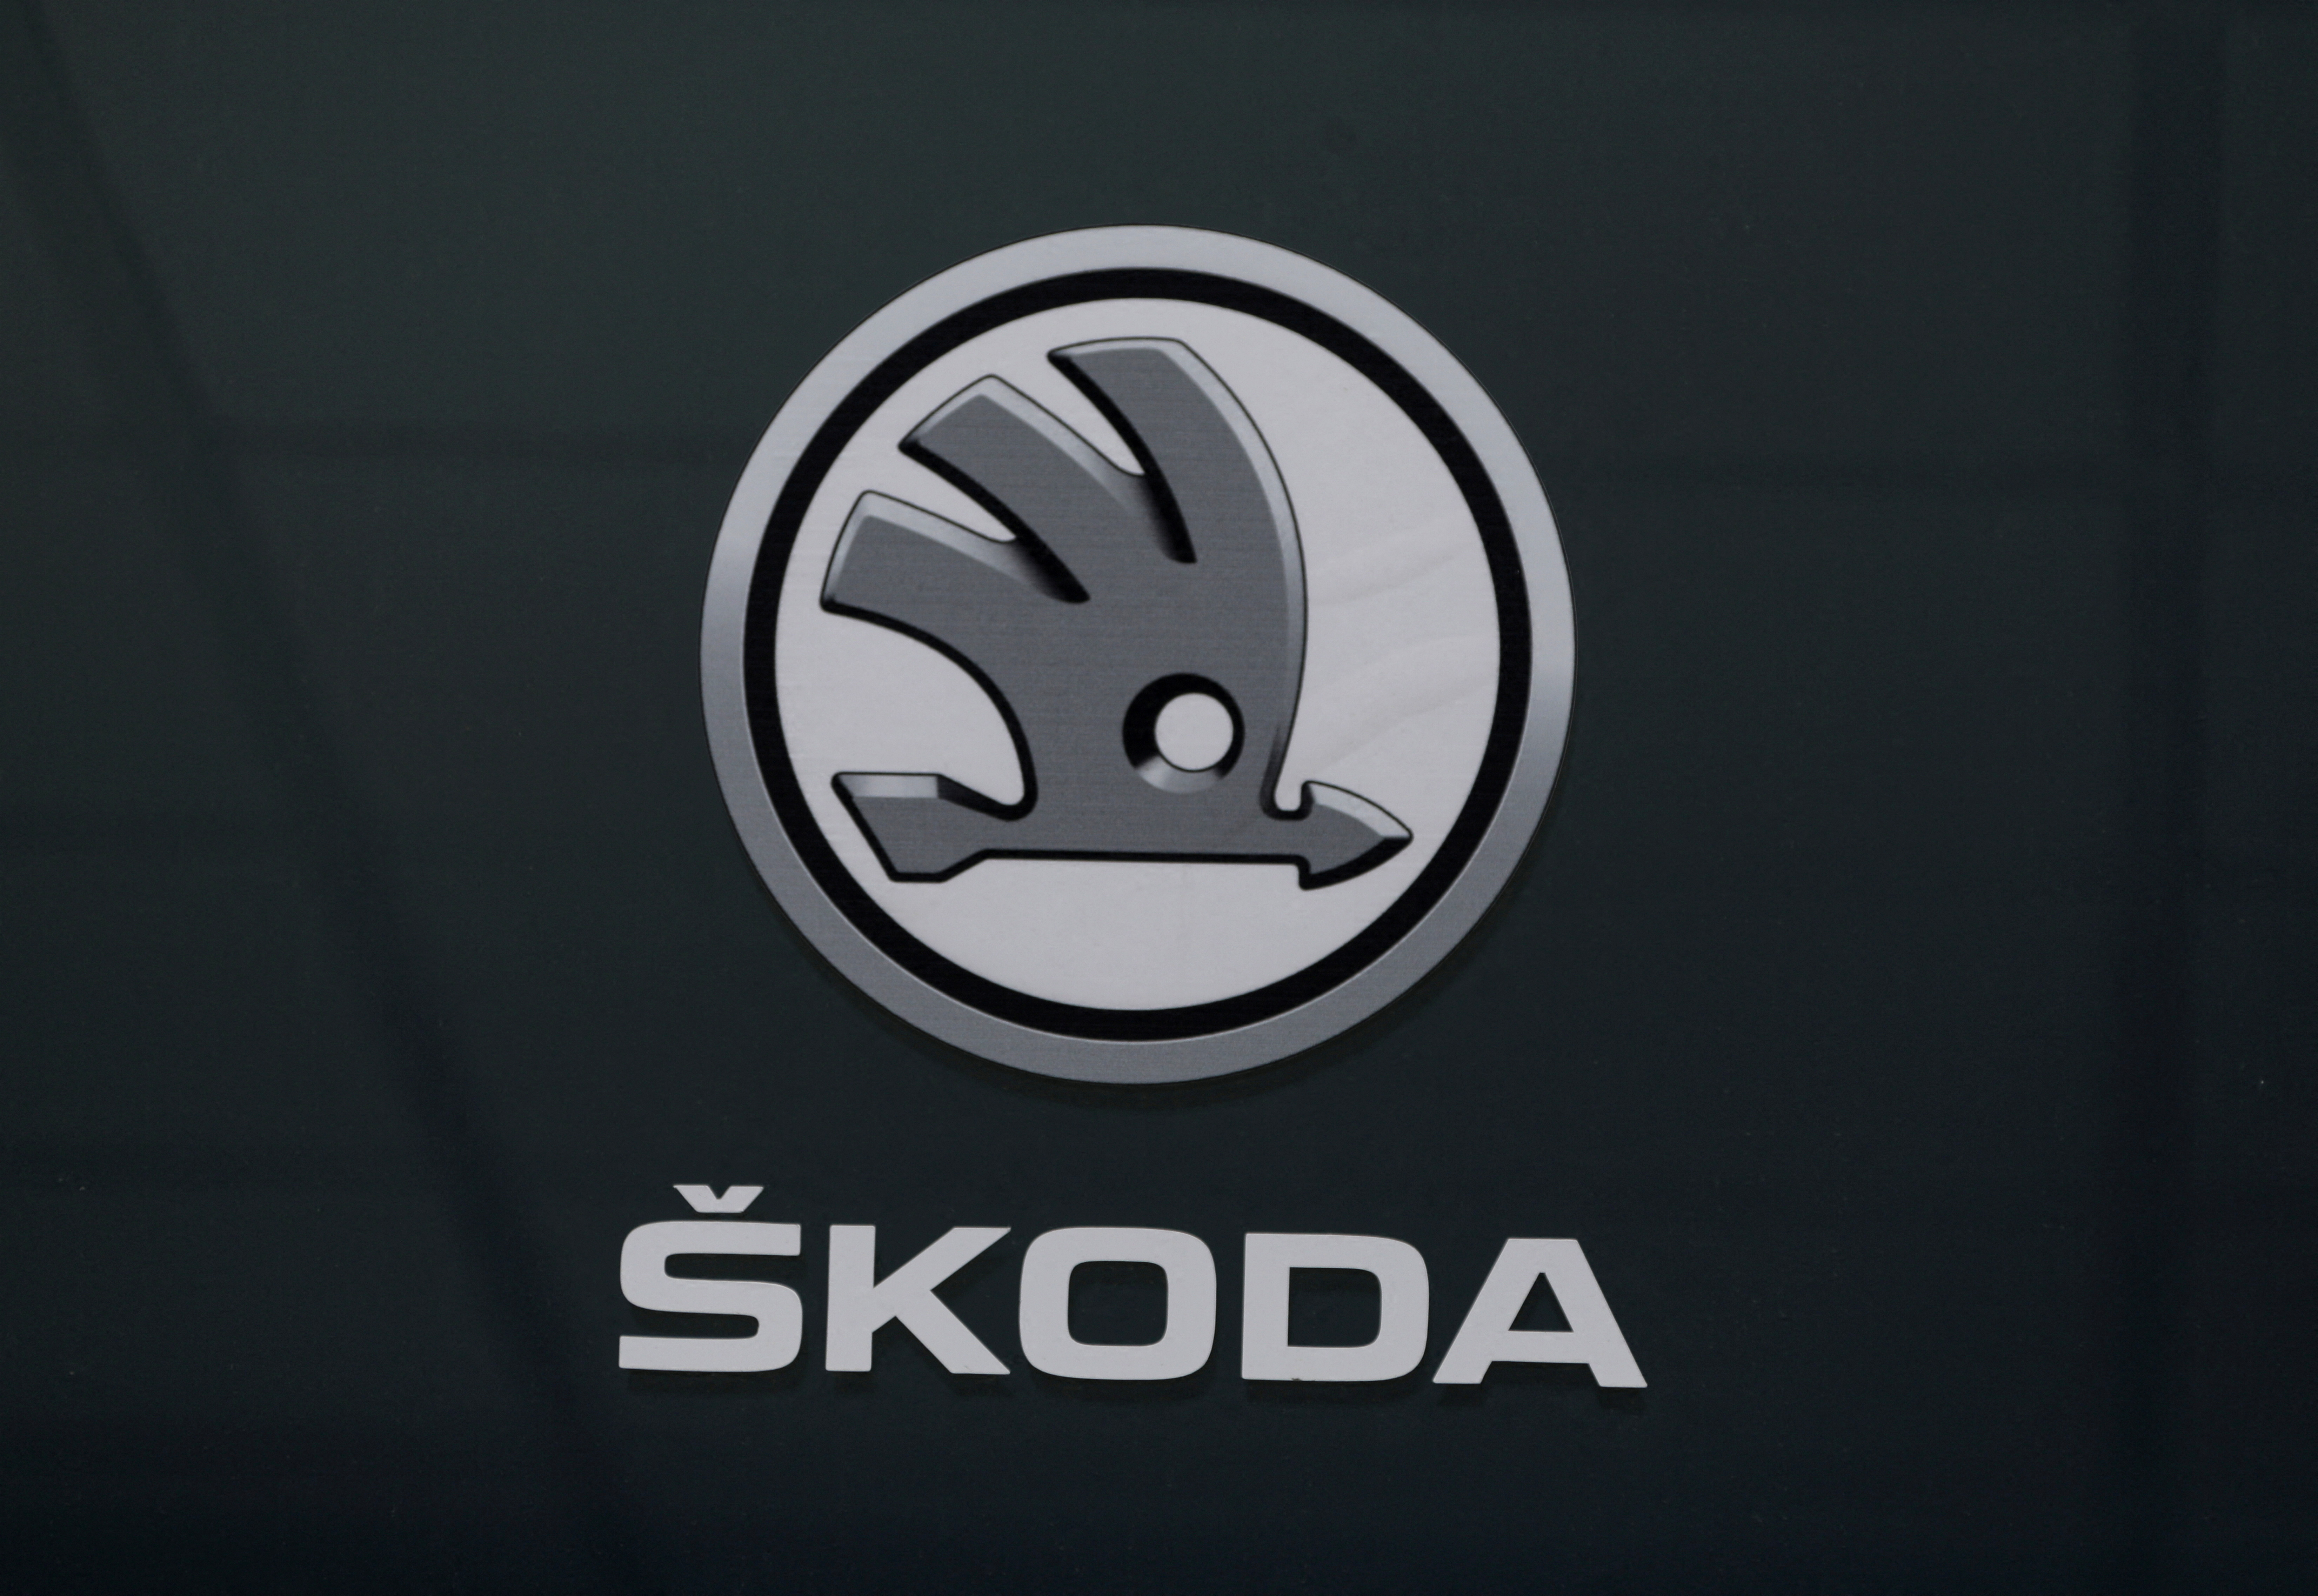 The logo of Skoda carmaker is seen at the entrance of a showroom in Nice